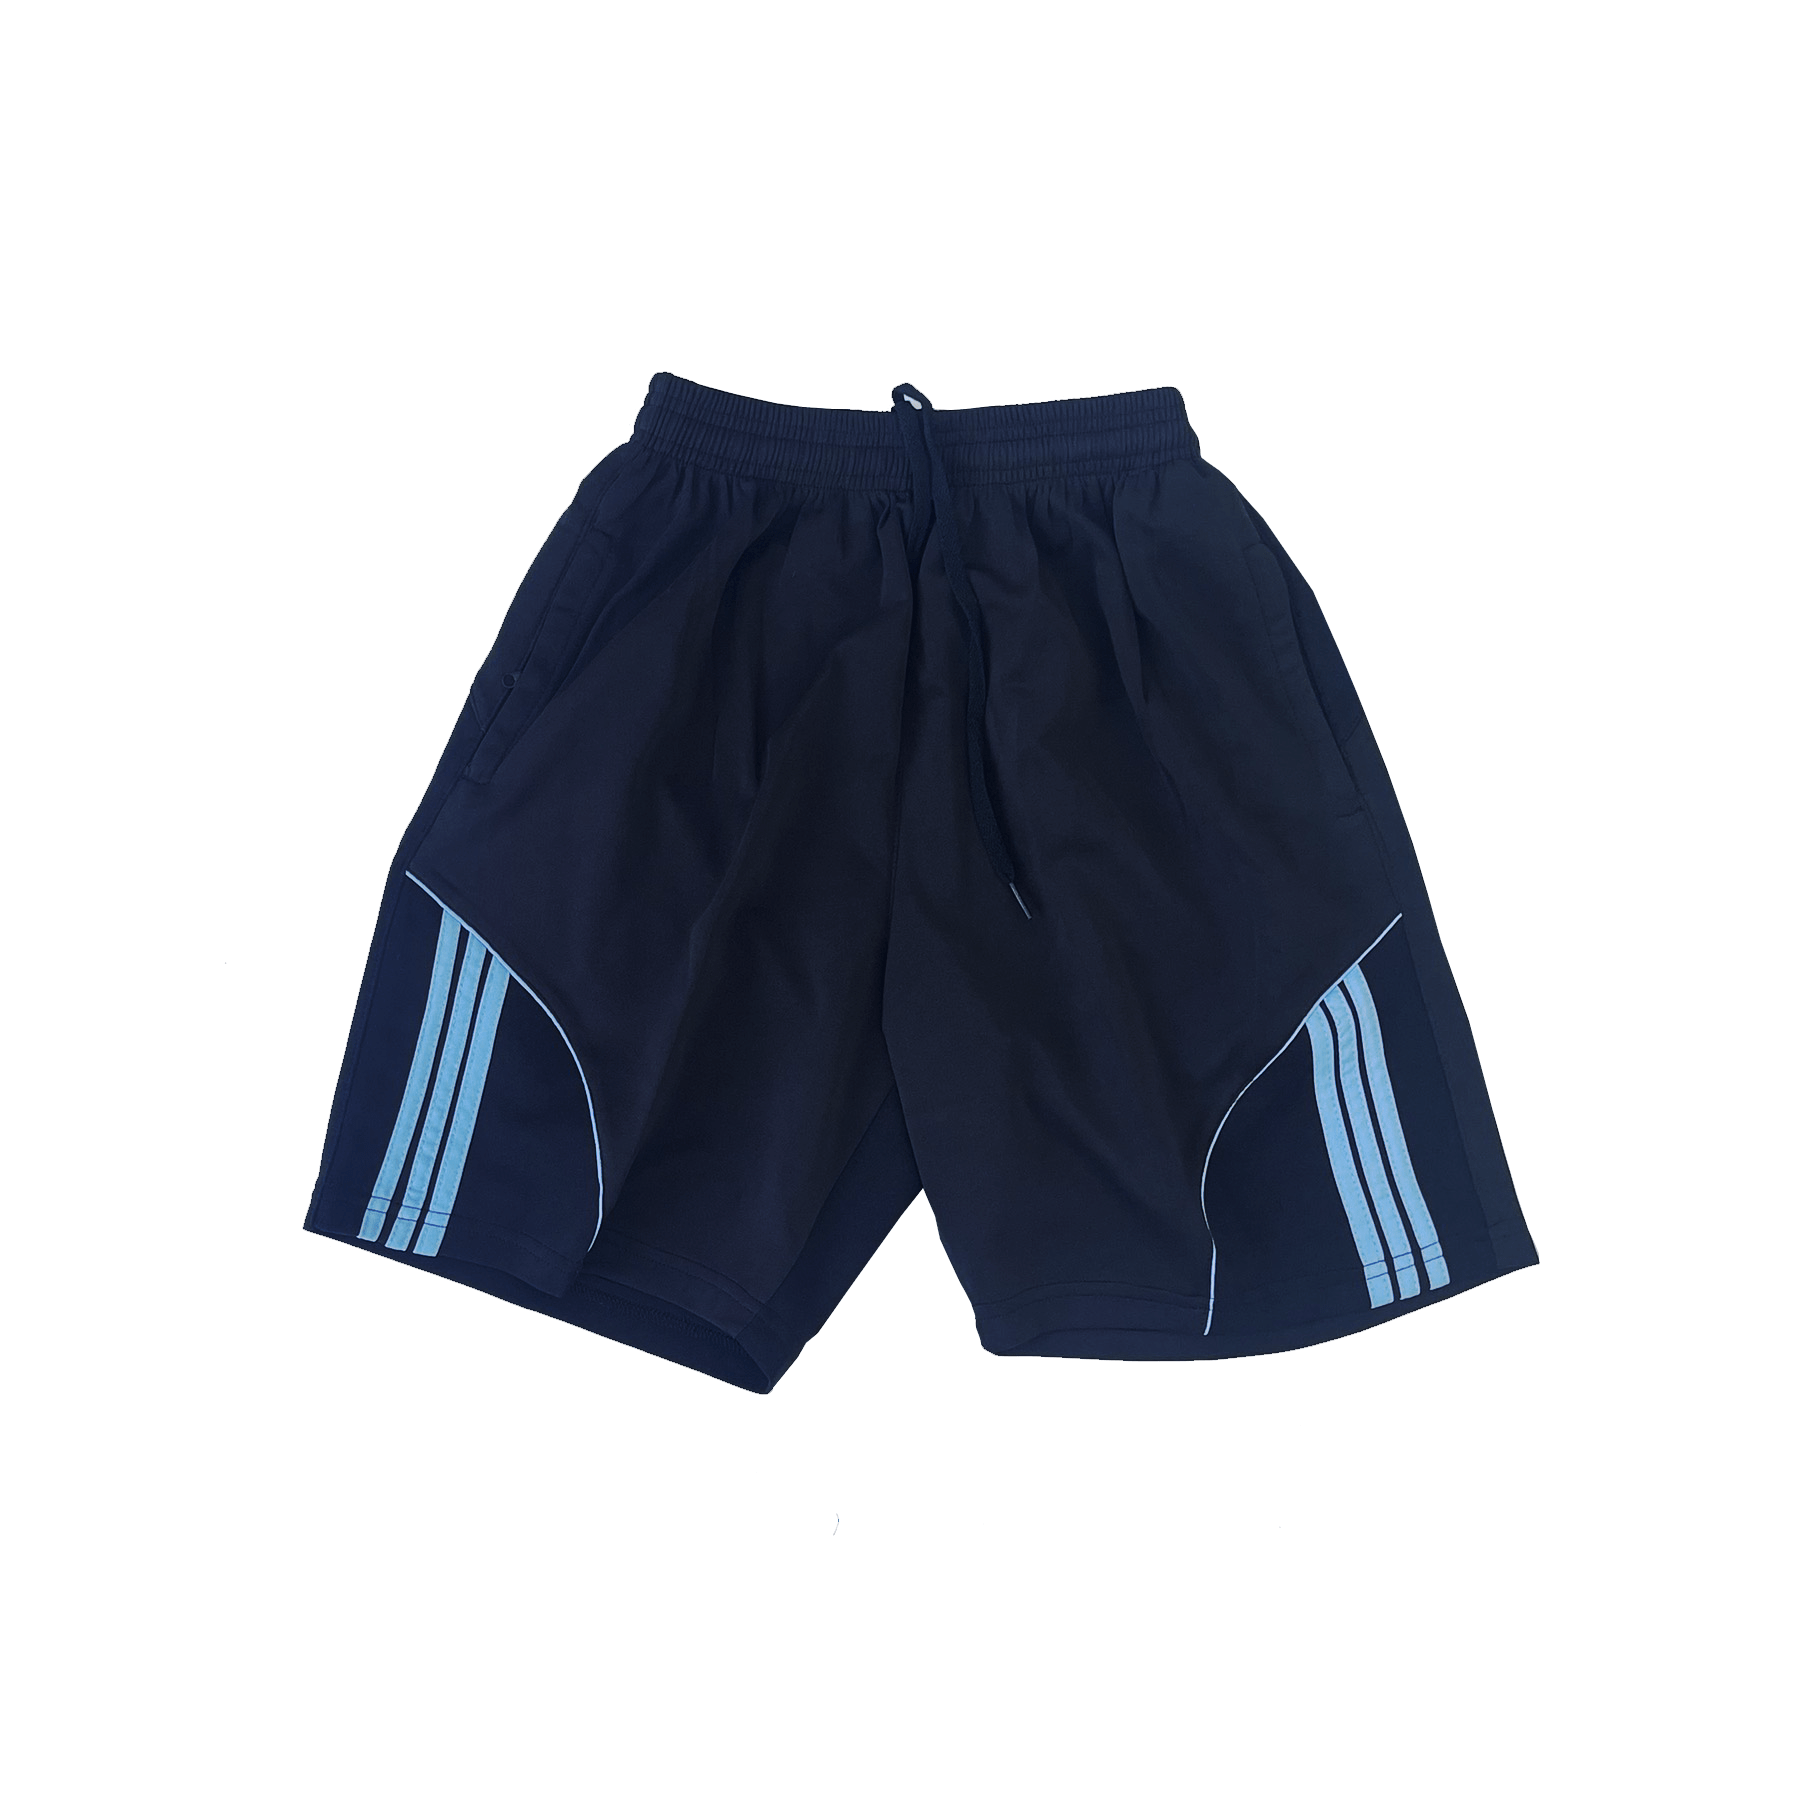 Logo Active Wear High Waist Stretch Short Pants New Arrival New Style For Men 2023 Each One In Opp Bag Vietnam Manufacturer 4